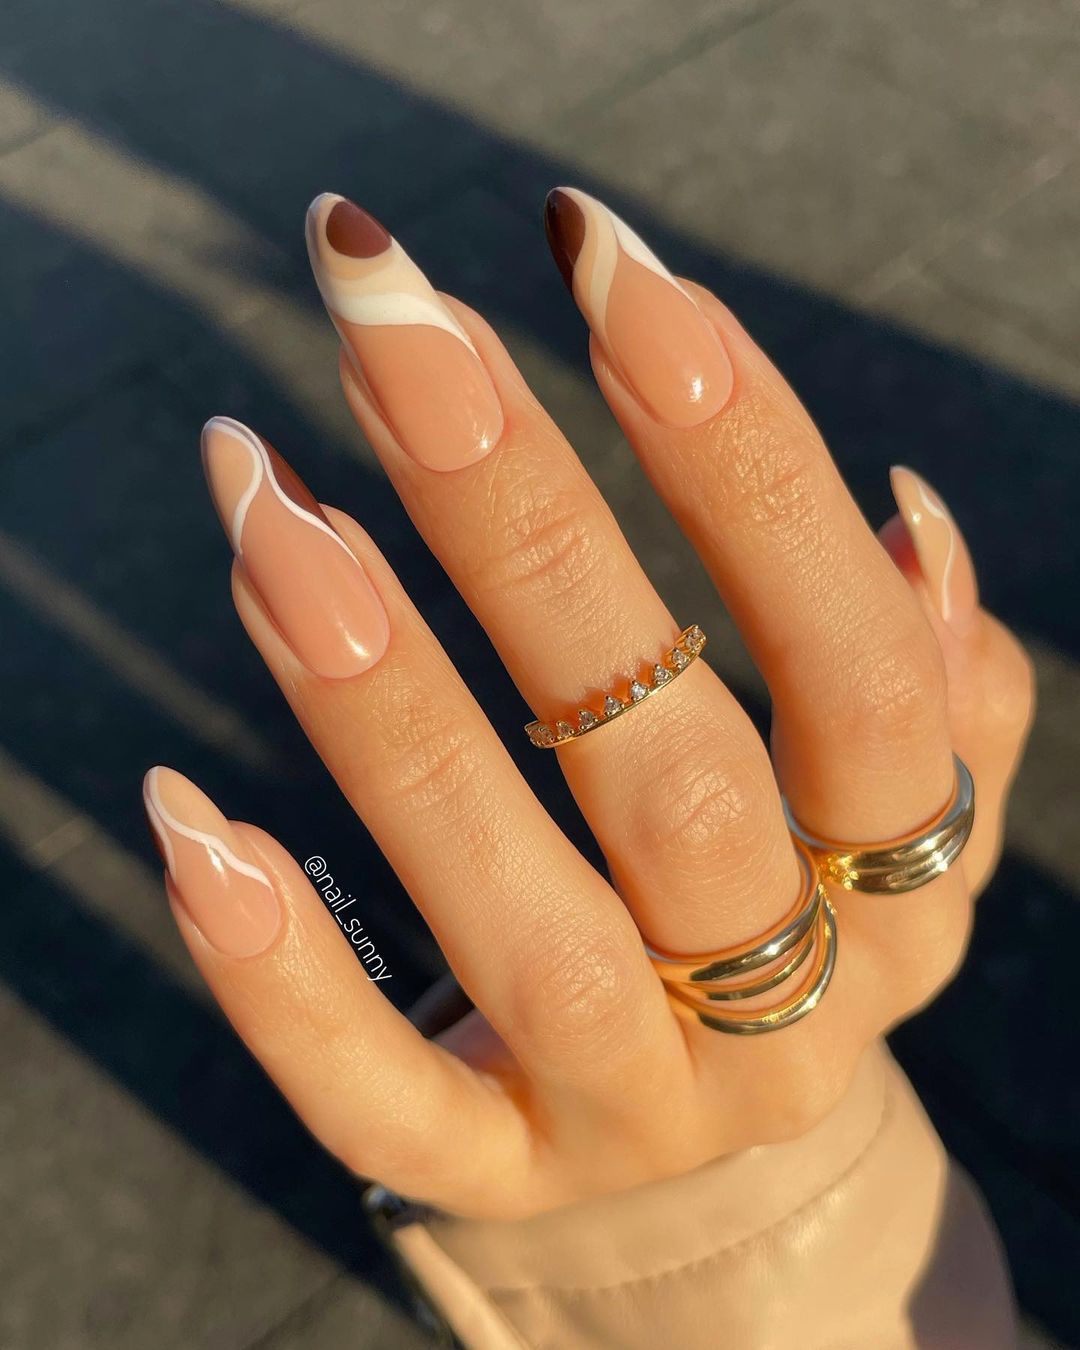 12 Trending Nail Designs You Should Try At Least Once! - FunNow｜生活玩樂誌